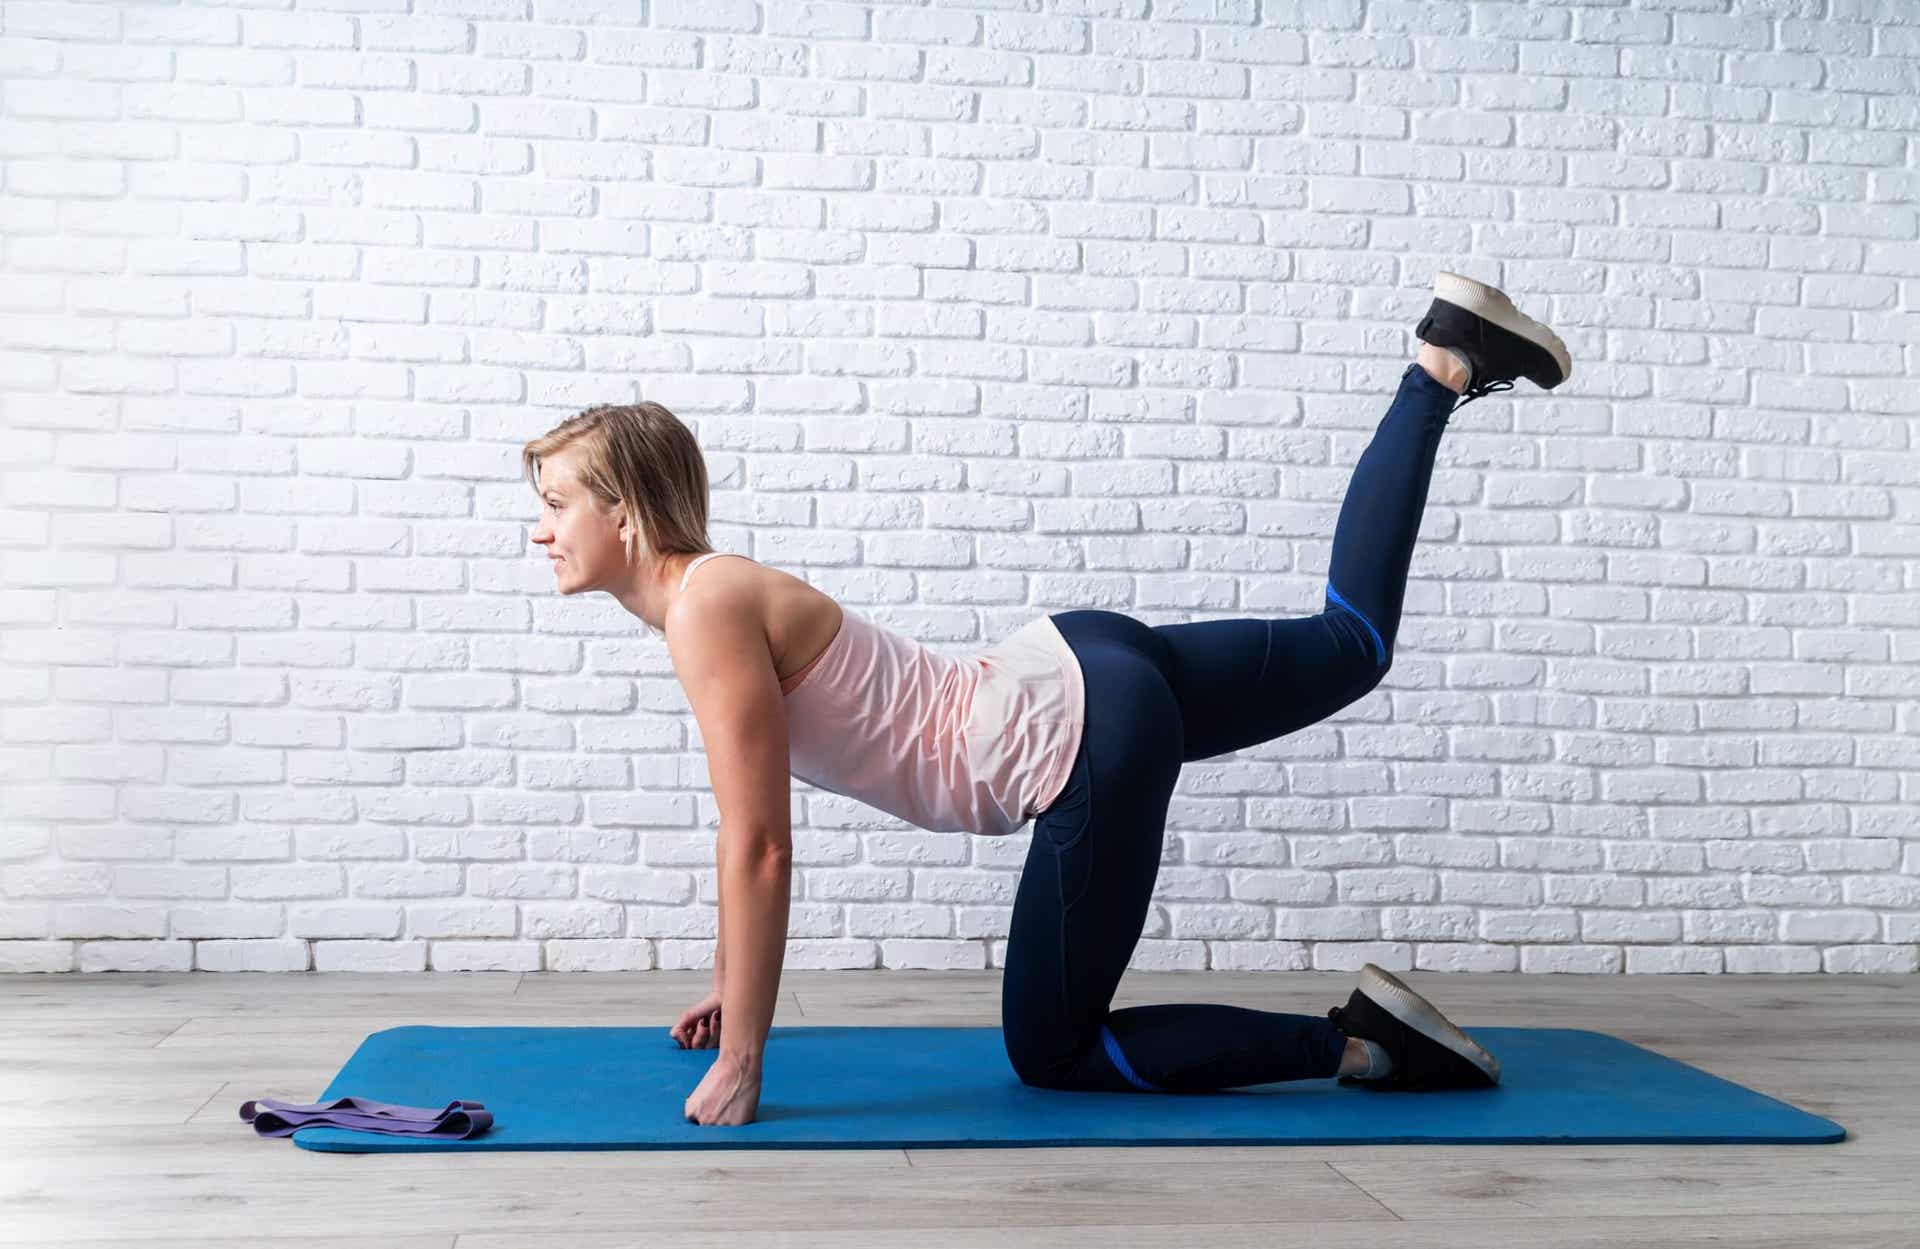 A woman doing exercises.